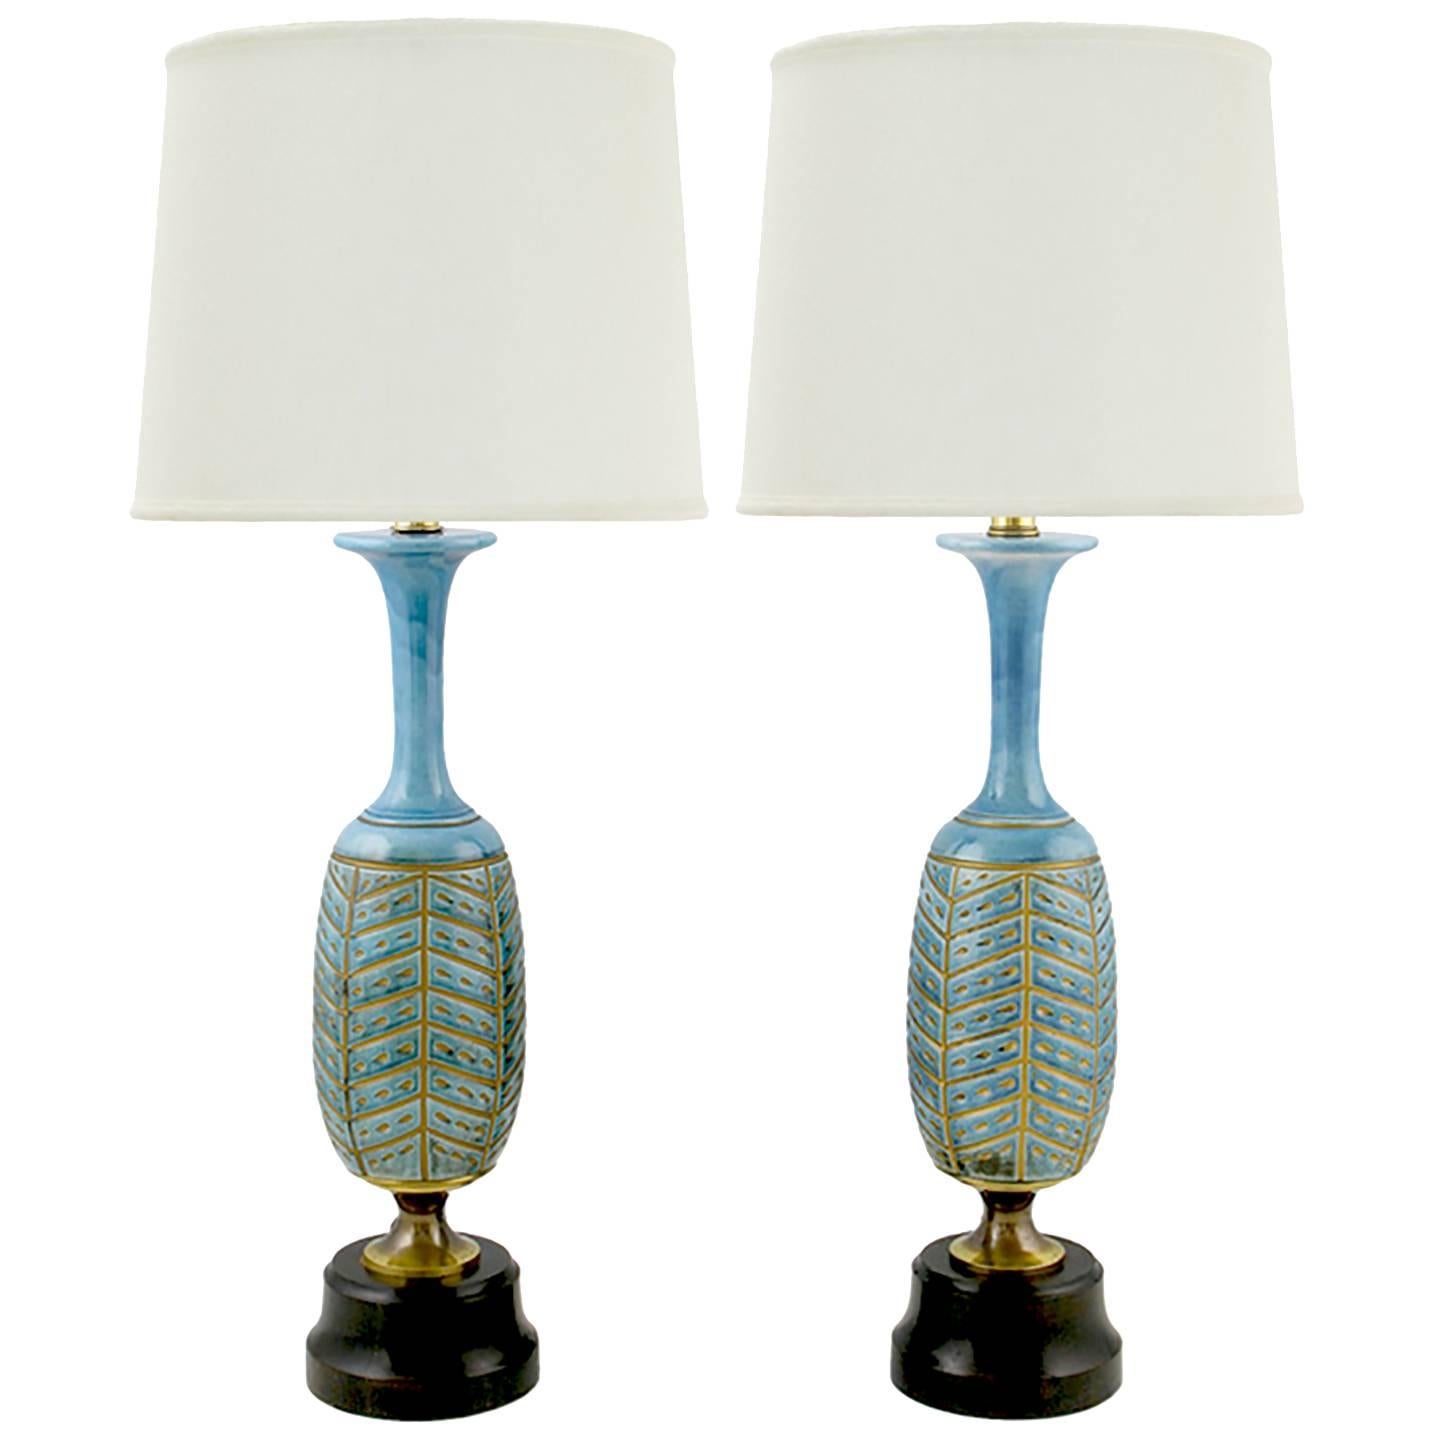 Pair of Rembrandt Cerulean Blue Pottery and Brass Table Lamps